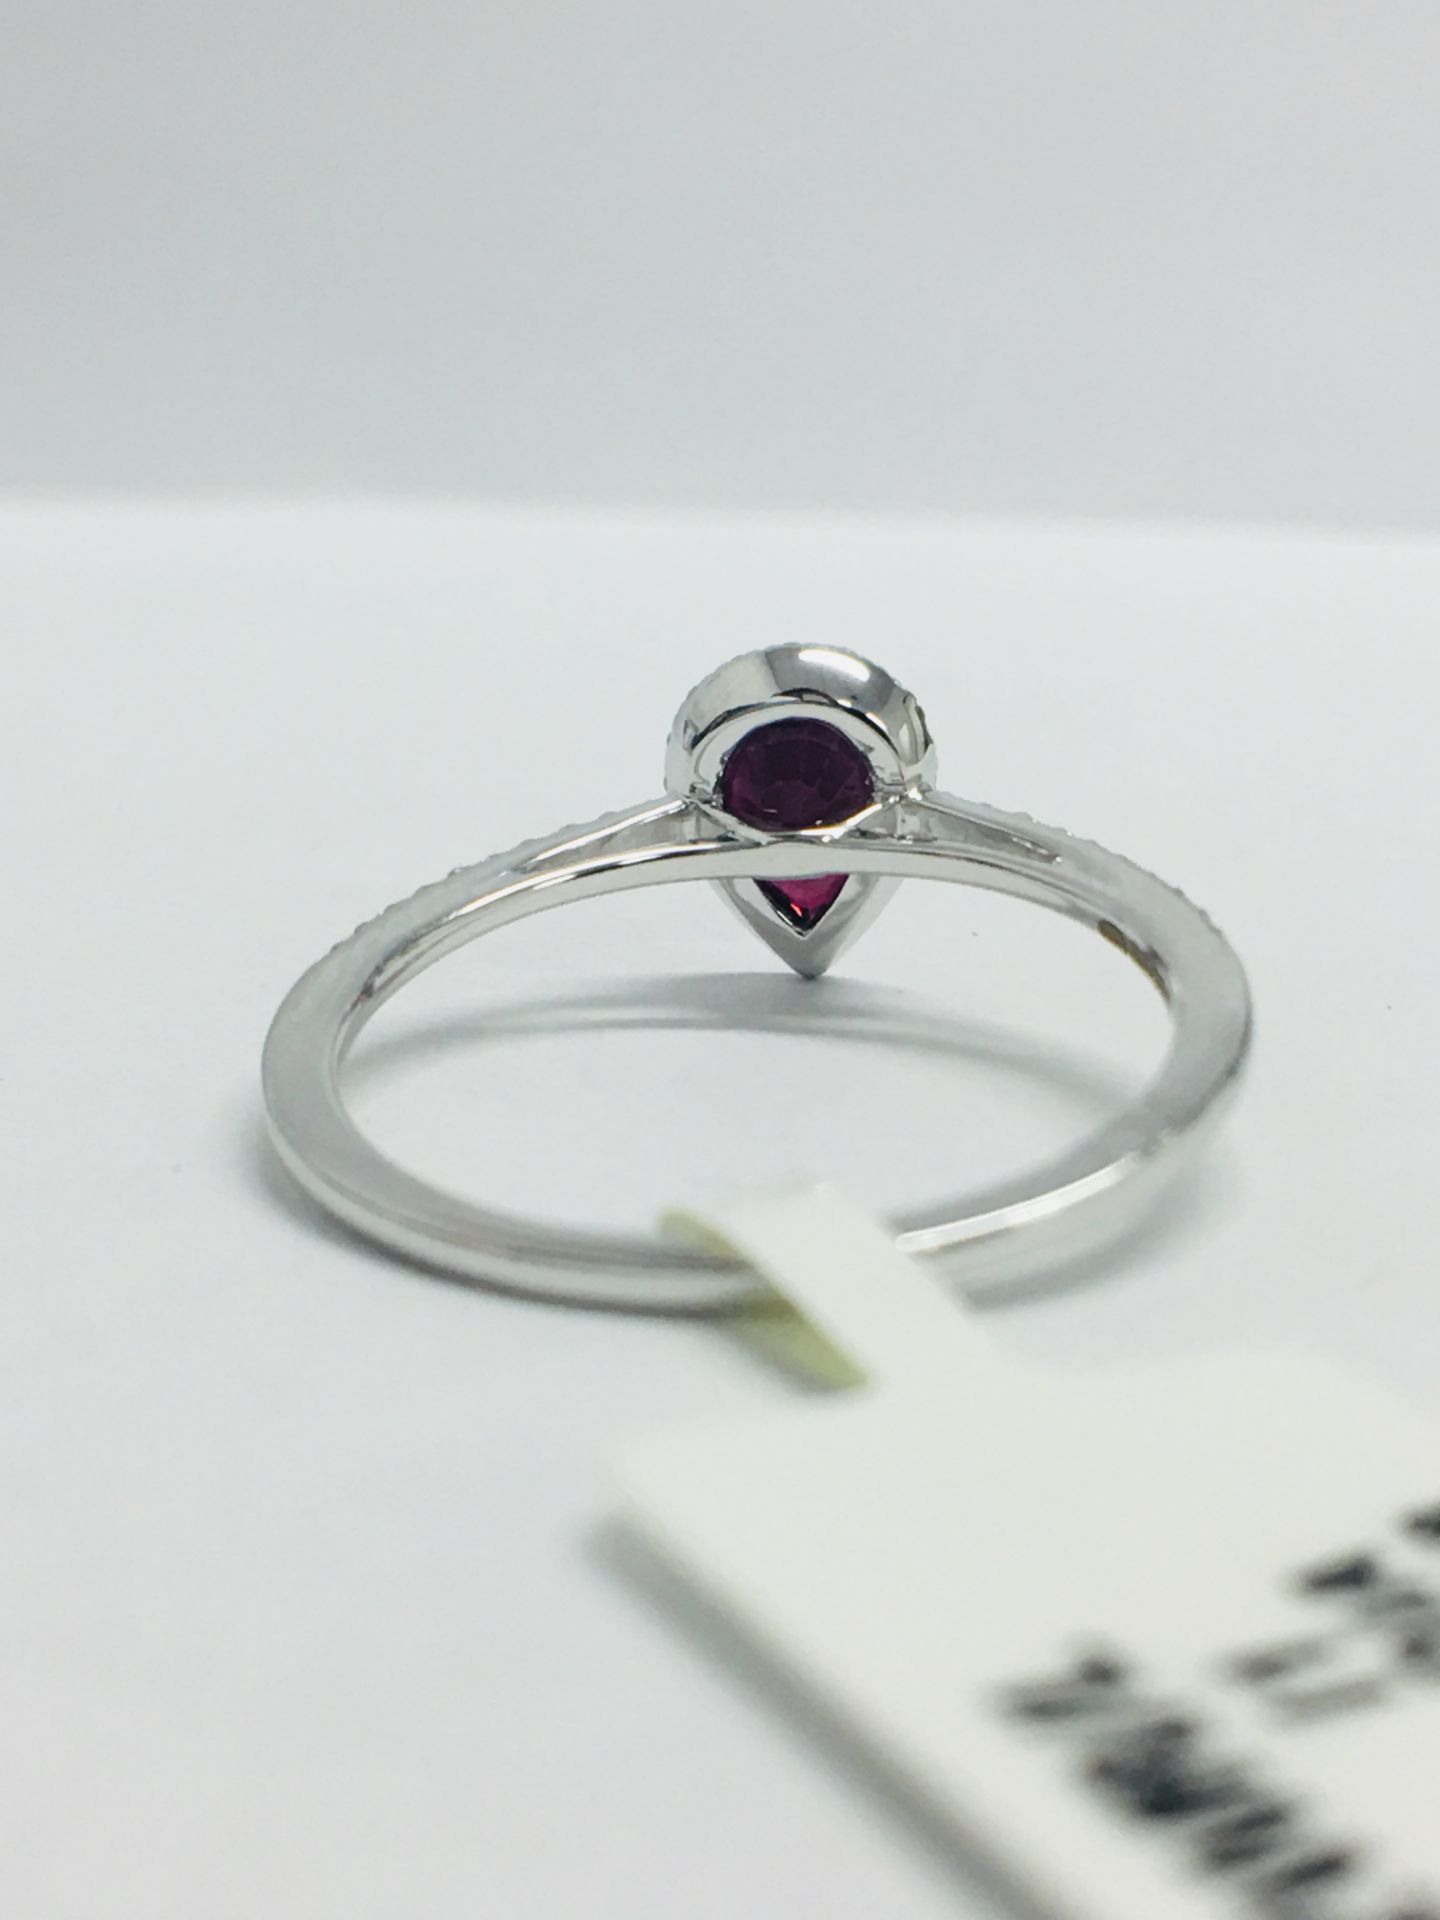 9ct White Pearshape Ruby Diamond Ring - Image 6 of 11